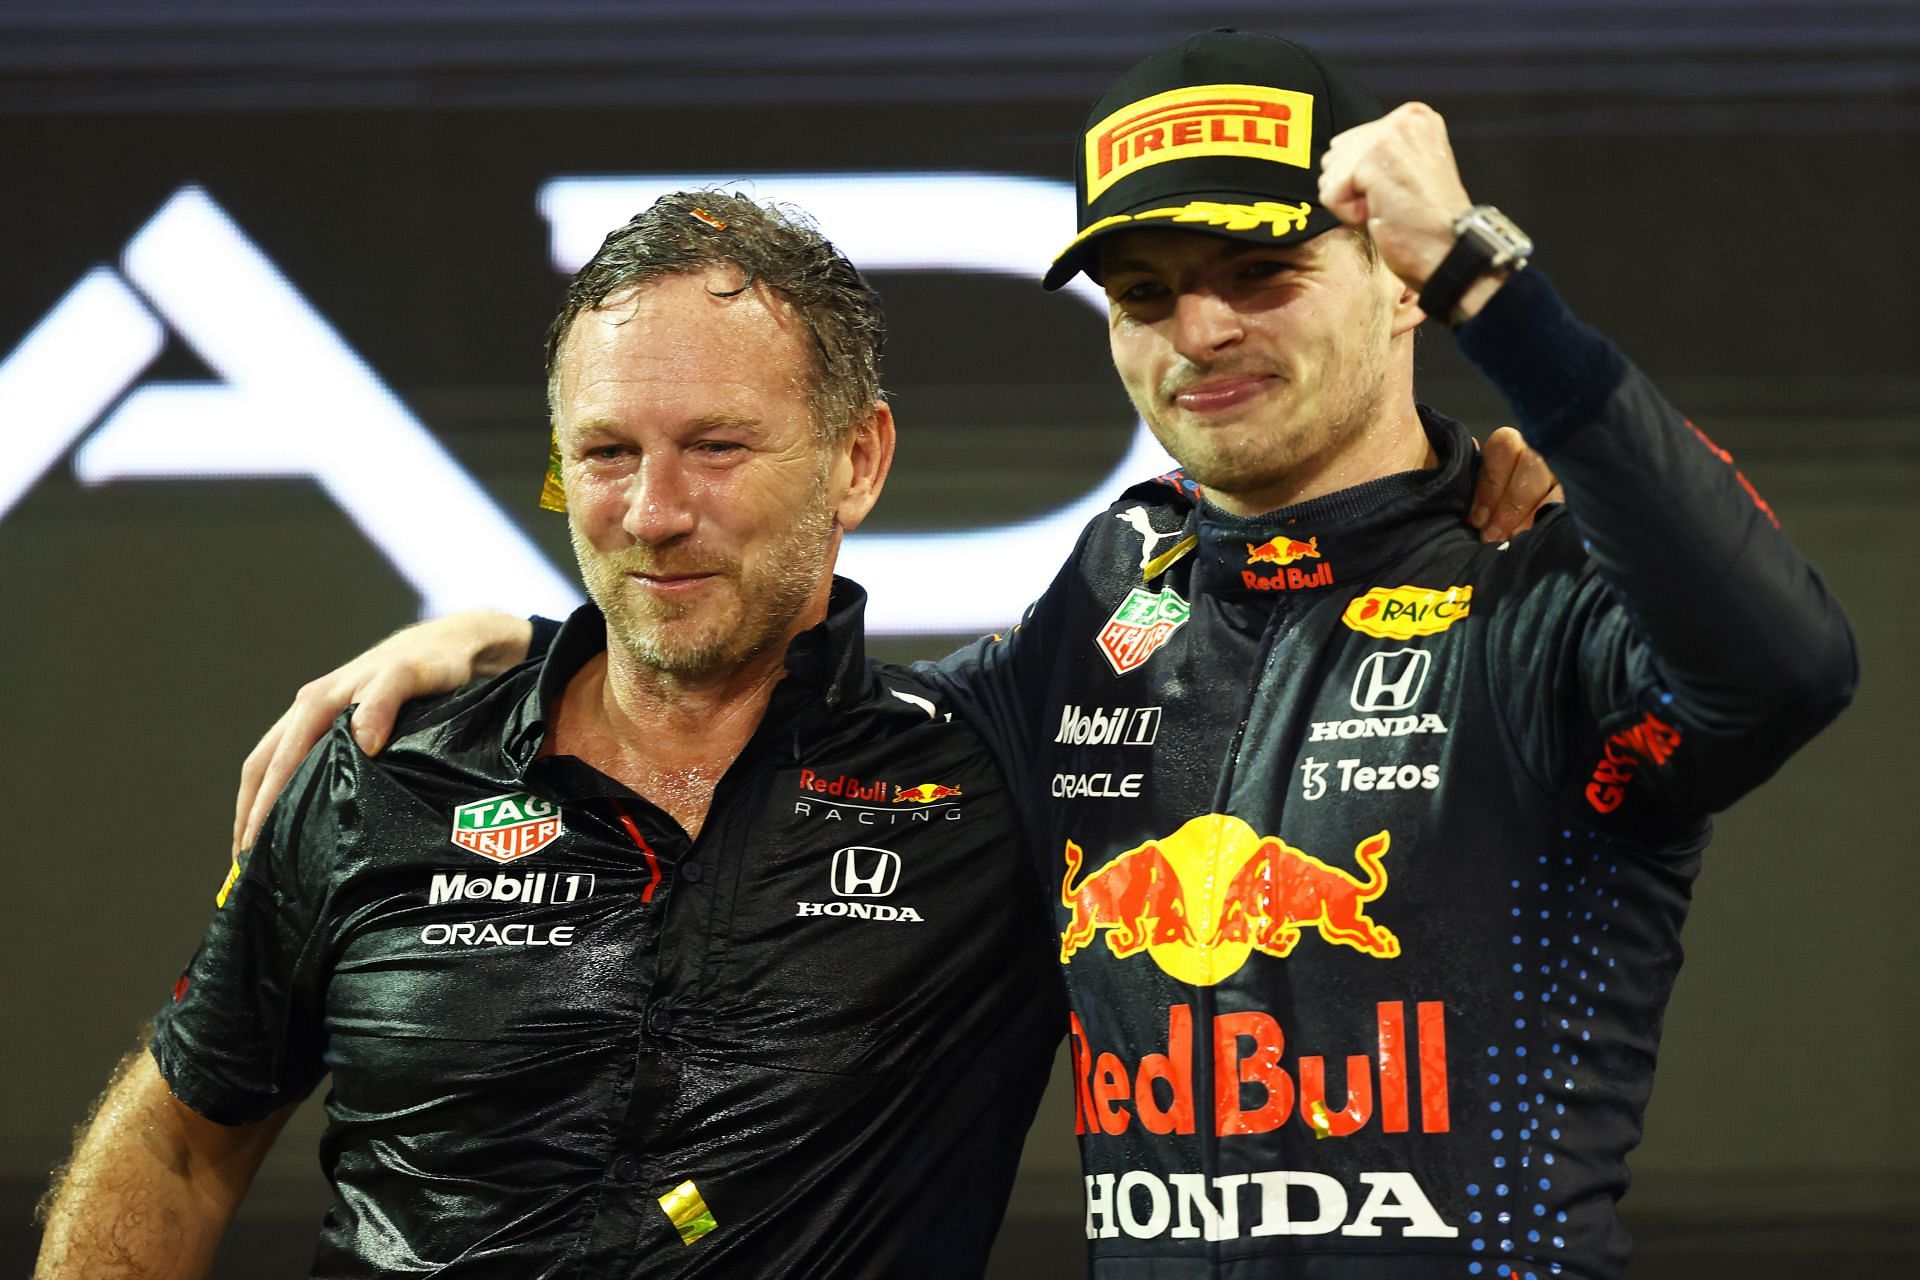 Christian Horner (left) and Max Verstappen (right) (Photo by Bryn Lennon/Getty Images)